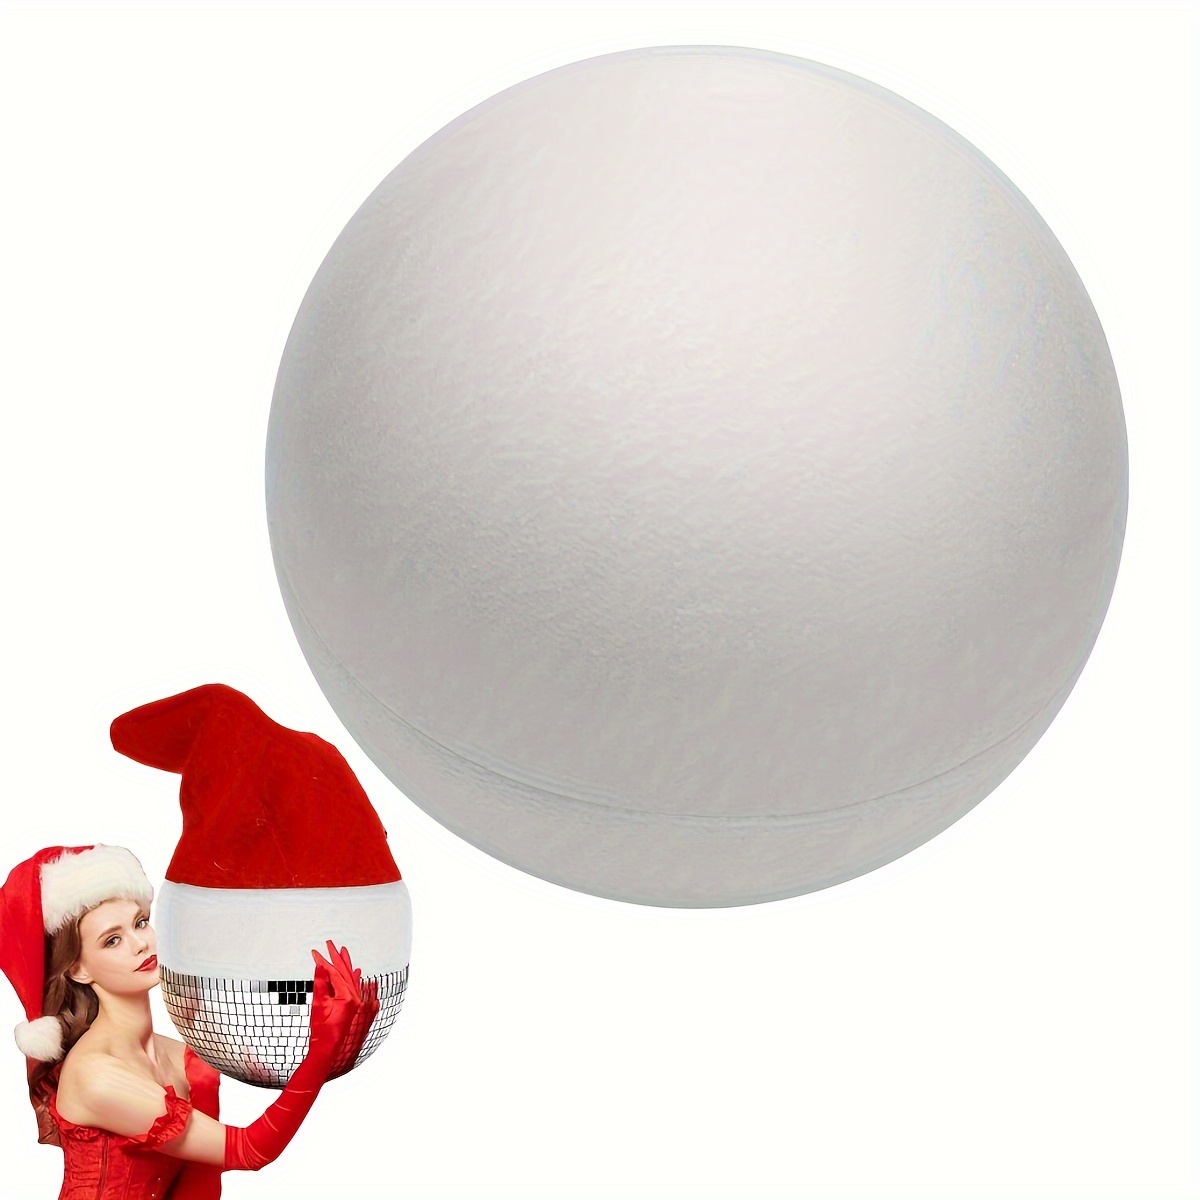 Styrofoam Balls,Ultra Light Sturdy Foam Ball,White Polystyrene Smooth Round  Ball,for Arts and Crafts,Wedding and Holiday Party DIY,School and Modeling